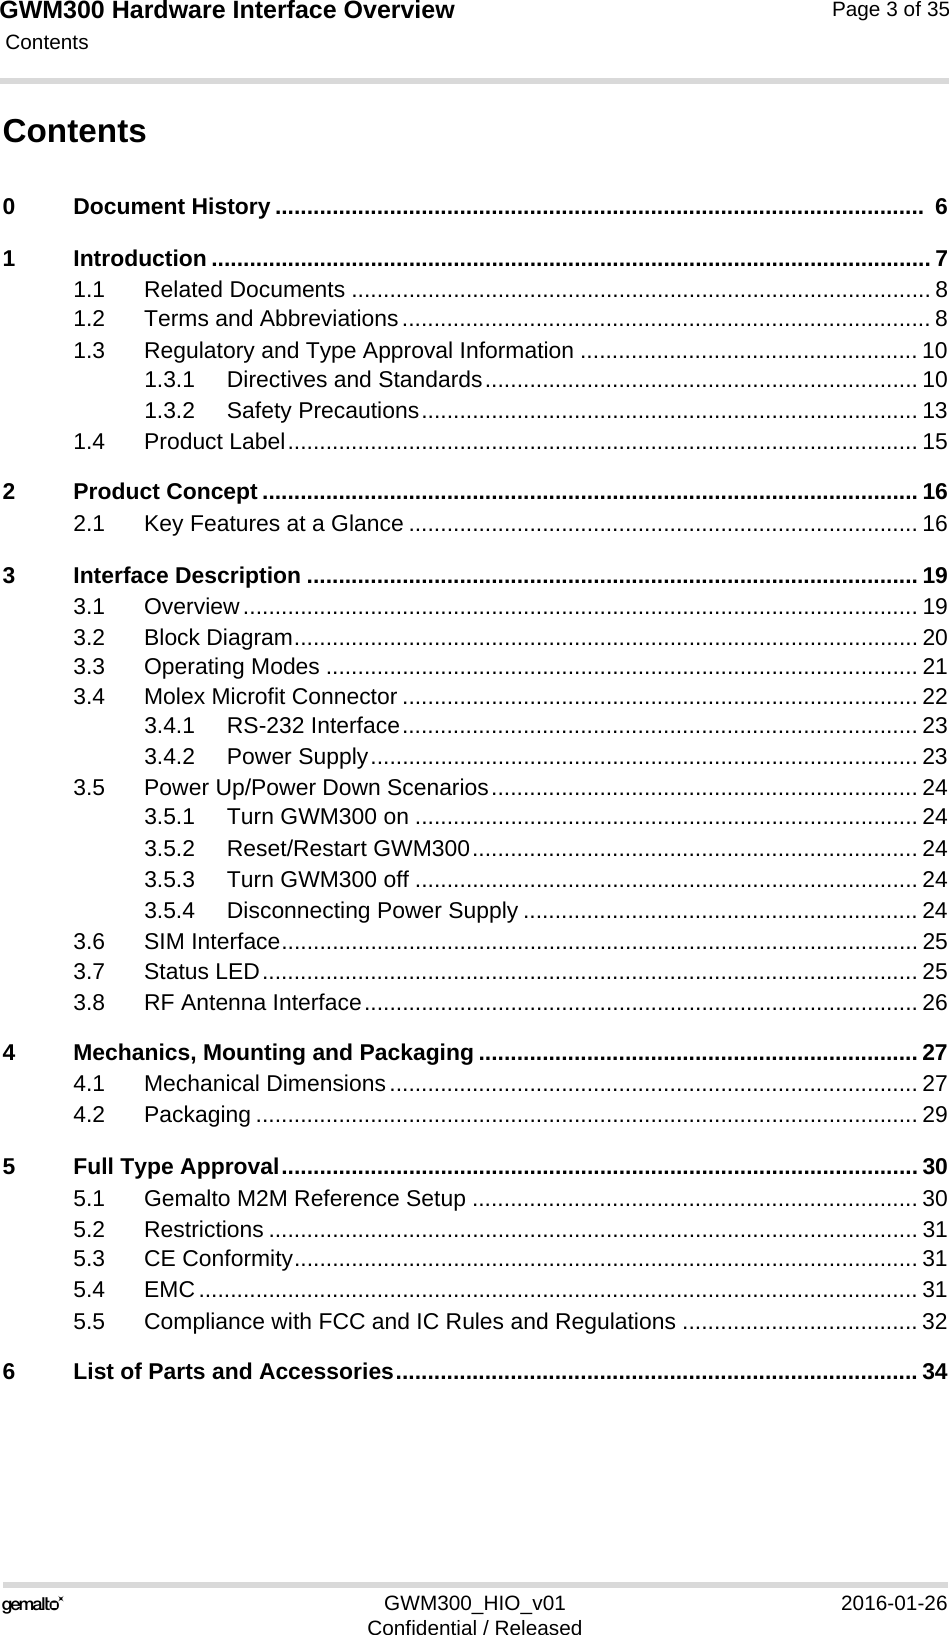 GWM300 Hardware Interface Overview Contents124GWM300_HIO_v01 2016-01-26Confidential / ReleasedPage 3 of 35Contents0 Document History ......................................................................................................  61 Introduction ................................................................................................................. 71.1 Related Documents ........................................................................................... 81.2 Terms and Abbreviations................................................................................... 81.3 Regulatory and Type Approval Information ..................................................... 101.3.1 Directives and Standards.................................................................... 101.3.2 Safety Precautions.............................................................................. 131.4 Product Label................................................................................................... 152 Product Concept ....................................................................................................... 162.1 Key Features at a Glance ................................................................................ 163 Interface Description ................................................................................................ 193.1 Overview.......................................................................................................... 193.2 Block Diagram.................................................................................................. 203.3 Operating Modes ............................................................................................. 213.4 Molex Microfit Connector ................................................................................. 223.4.1 RS-232 Interface................................................................................. 233.4.2 Power Supply...................................................................................... 233.5 Power Up/Power Down Scenarios................................................................... 243.5.1 Turn GWM300 on ............................................................................... 243.5.2 Reset/Restart GWM300...................................................................... 243.5.3 Turn GWM300 off ............................................................................... 243.5.4 Disconnecting Power Supply .............................................................. 243.6 SIM Interface.................................................................................................... 253.7 Status LED....................................................................................................... 253.8 RF Antenna Interface....................................................................................... 264 Mechanics, Mounting and Packaging ..................................................................... 274.1 Mechanical Dimensions................................................................................... 274.2 Packaging ........................................................................................................ 295 Full Type Approval.................................................................................................... 305.1 Gemalto M2M Reference Setup ...................................................................... 305.2 Restrictions ...................................................................................................... 315.3 CE Conformity.................................................................................................. 315.4 EMC................................................................................................................. 315.5 Compliance with FCC and IC Rules and Regulations ..................................... 326 List of Parts and Accessories.................................................................................. 34